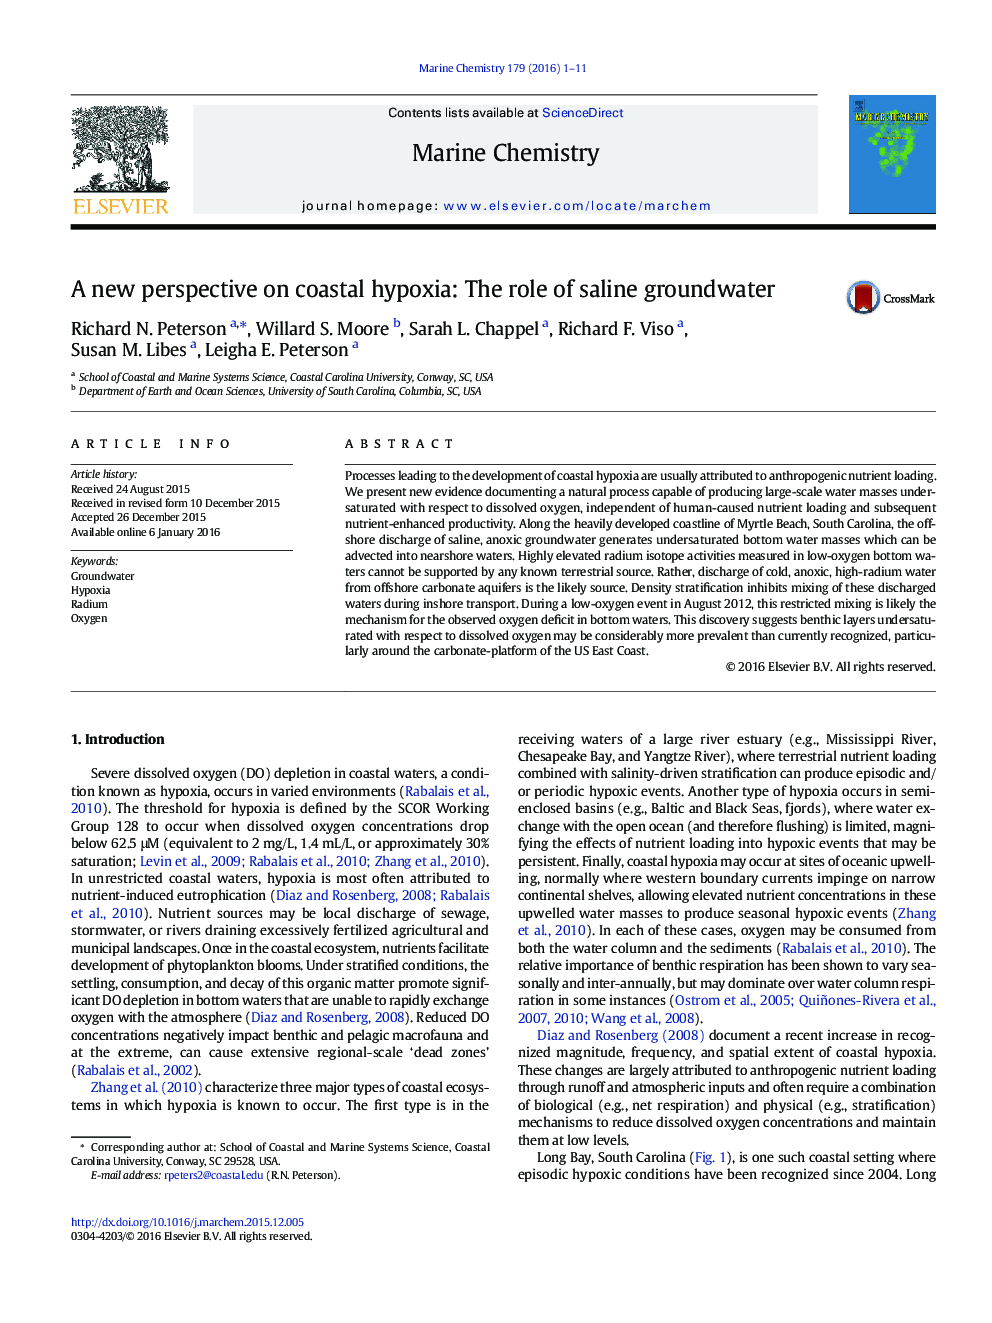 A new perspective on coastal hypoxia: The role of saline groundwater